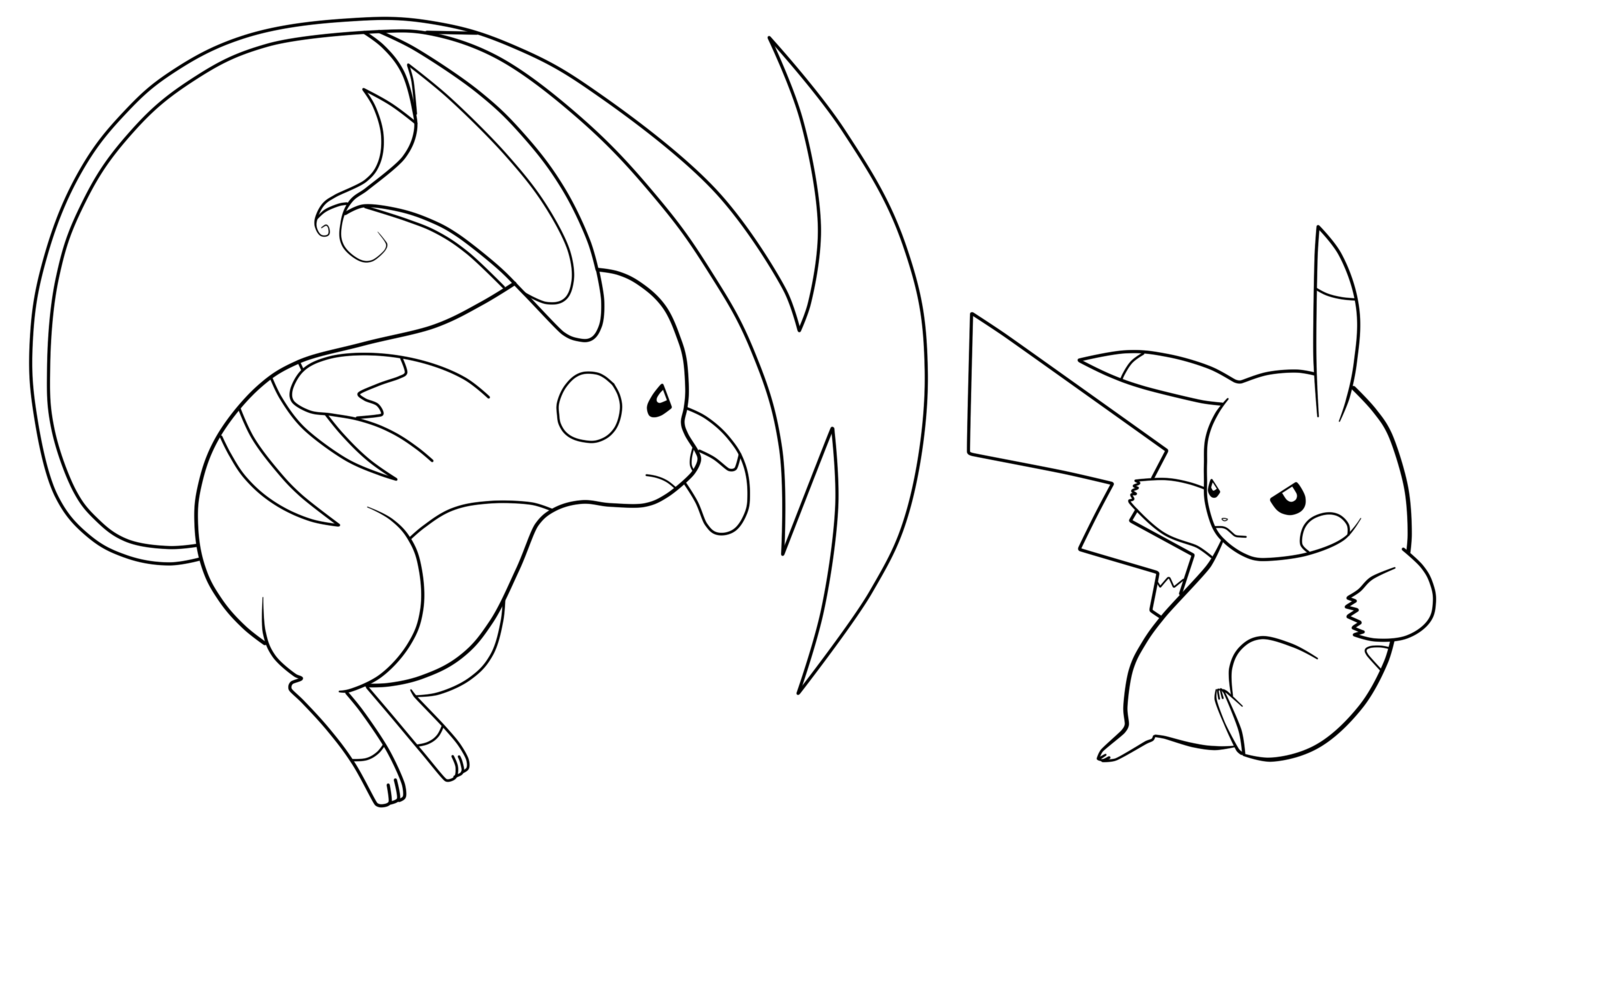 Raichu Coloring Page for Quick.